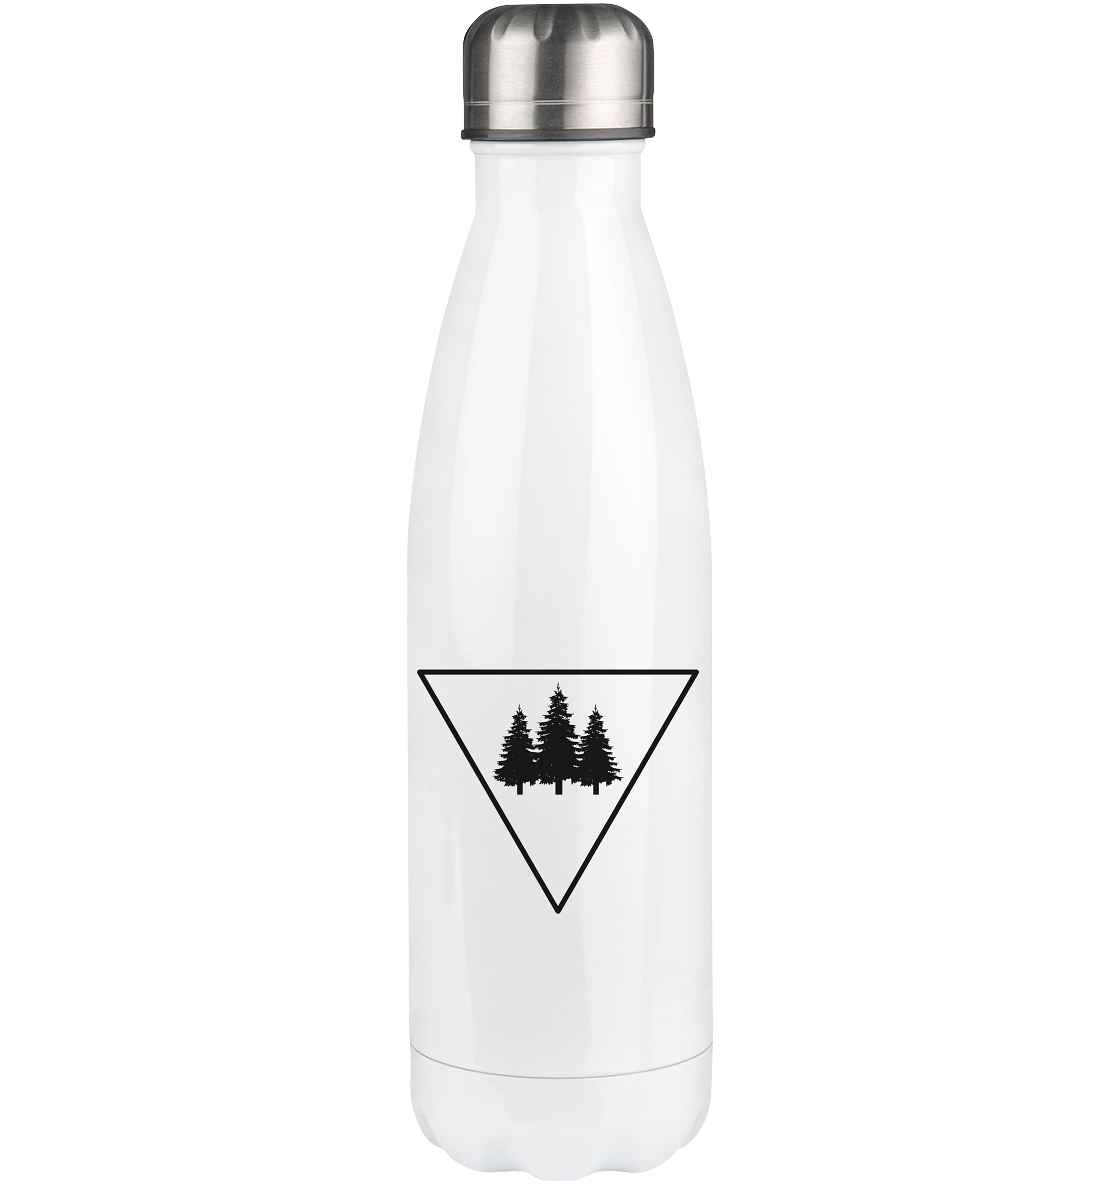 Triangle and Trees - Edelstahl Thermosflasche camping UONP 500ml